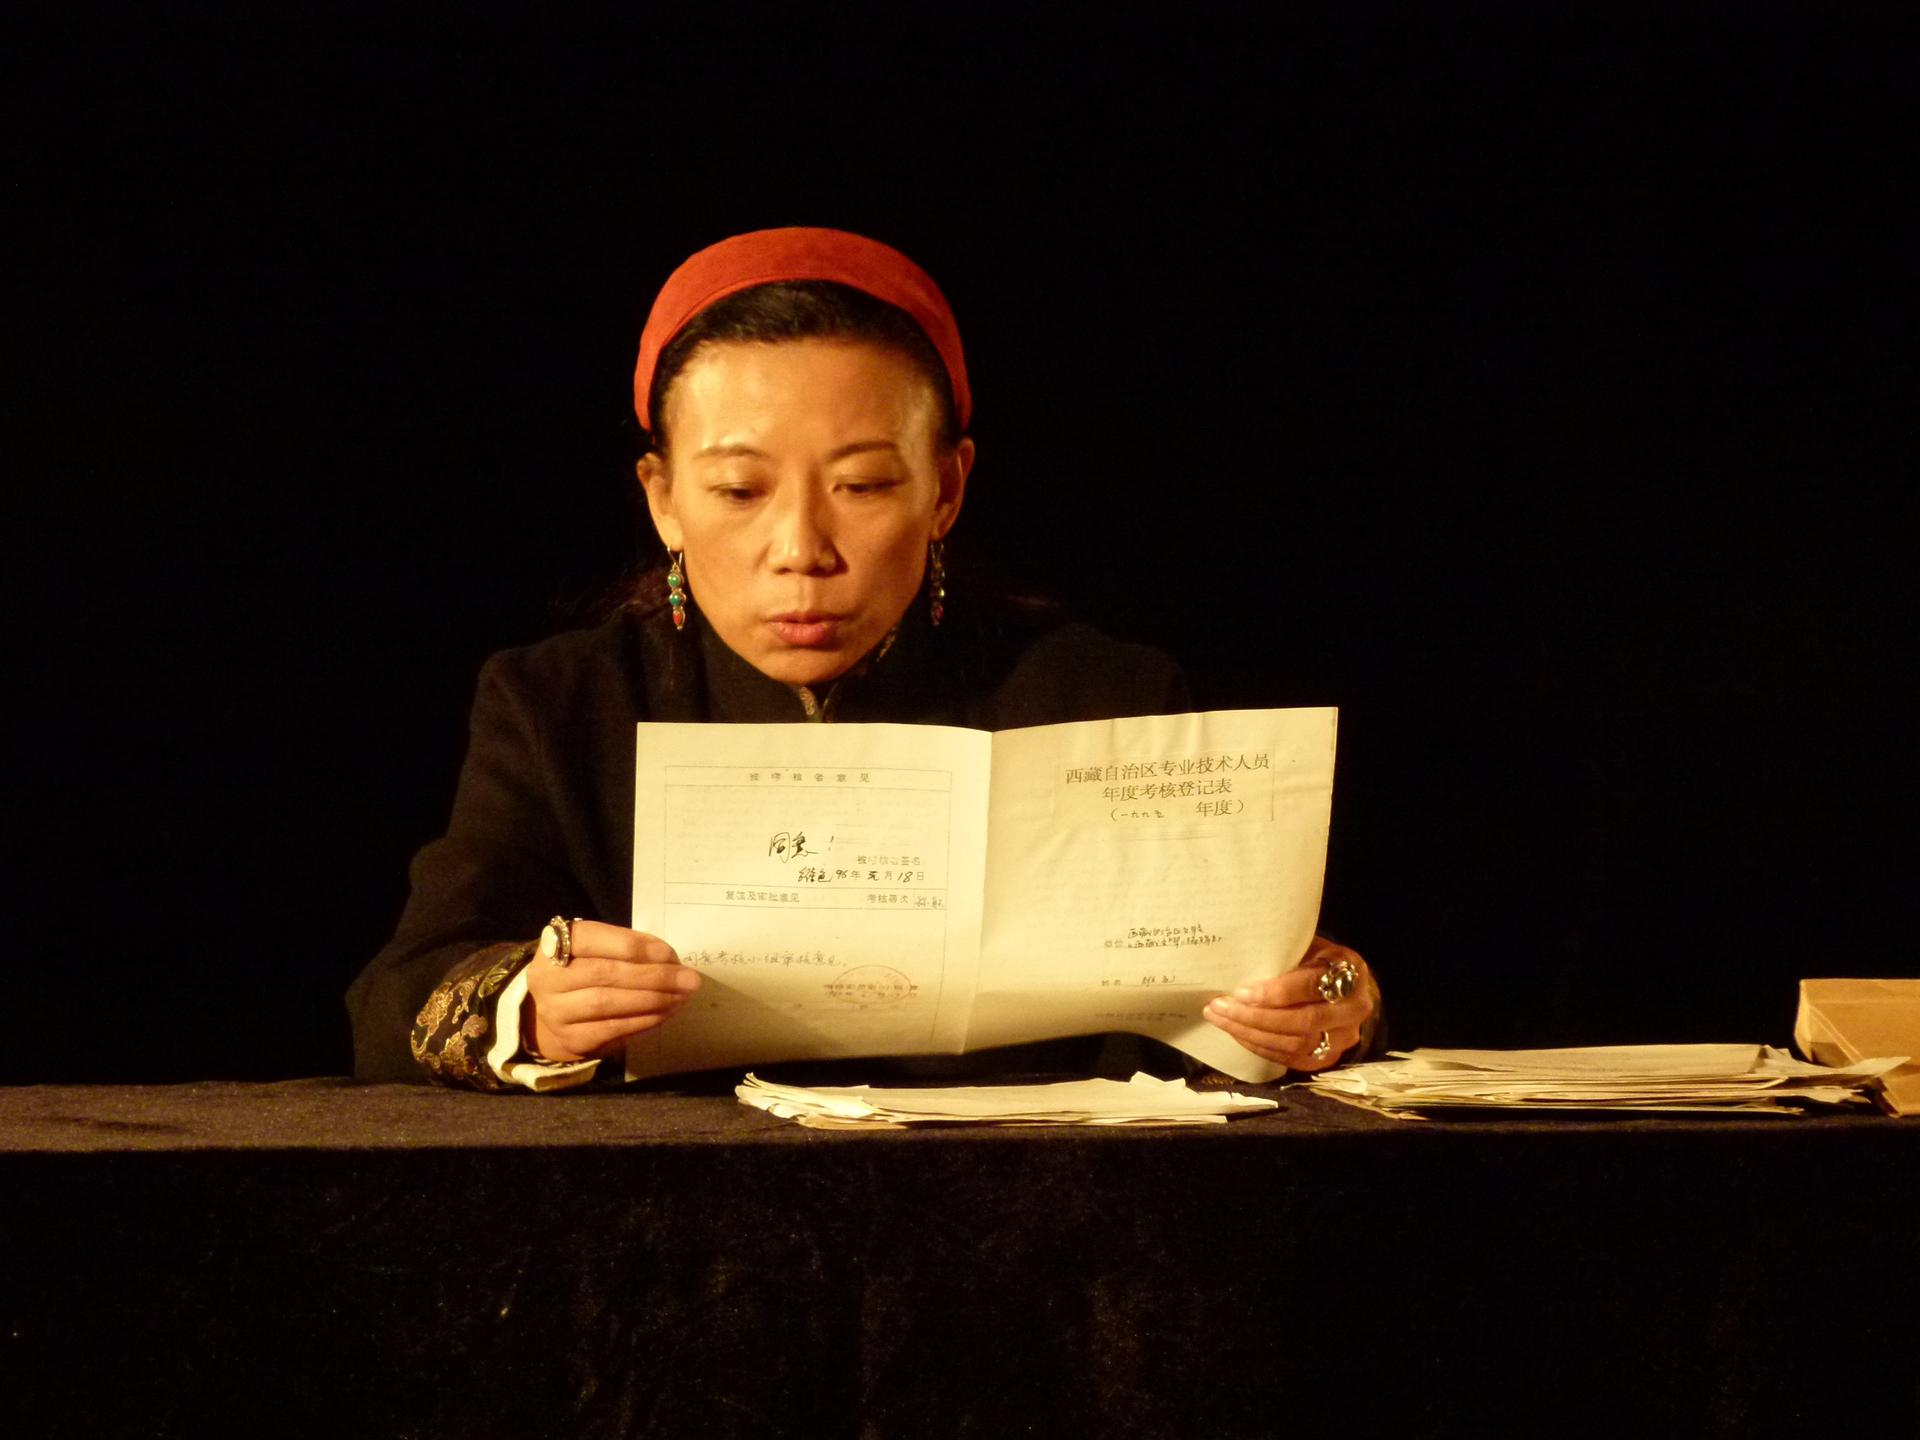 Tibetan writer Tsering Woeser reads from a government document about her activities in Zhu Rikun's film, 